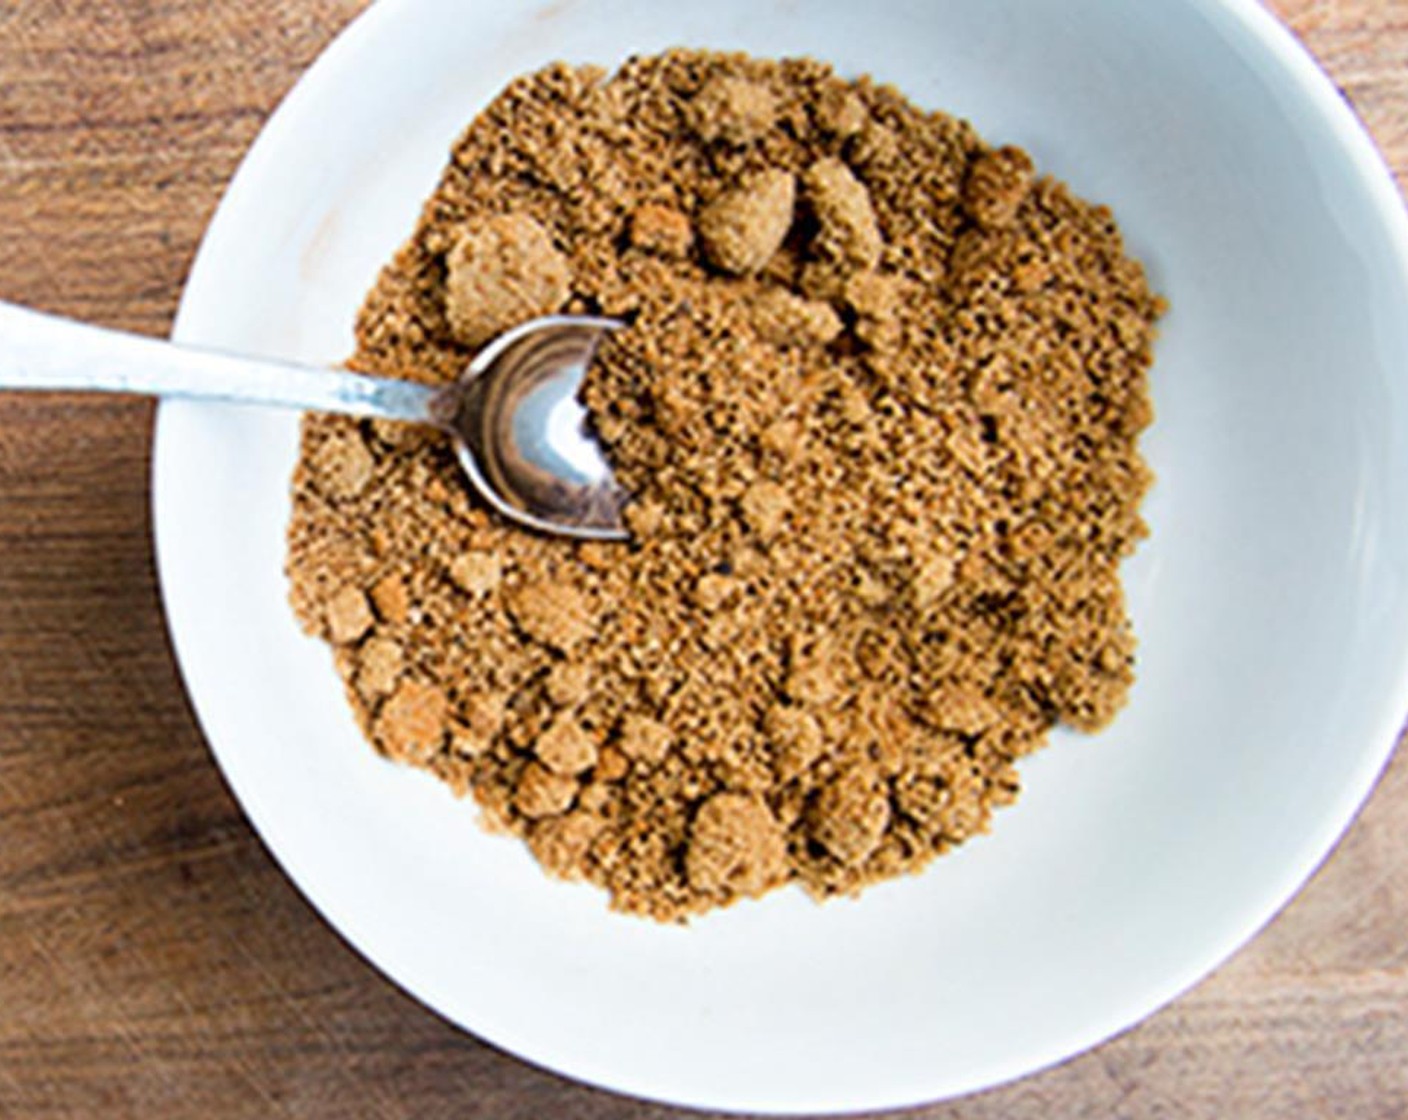 step 4 In a small bowl, mix Brown Sugar (1/2 cup), Ground Cinnamon (1 tsp) and Ground Nutmeg (1 tsp).